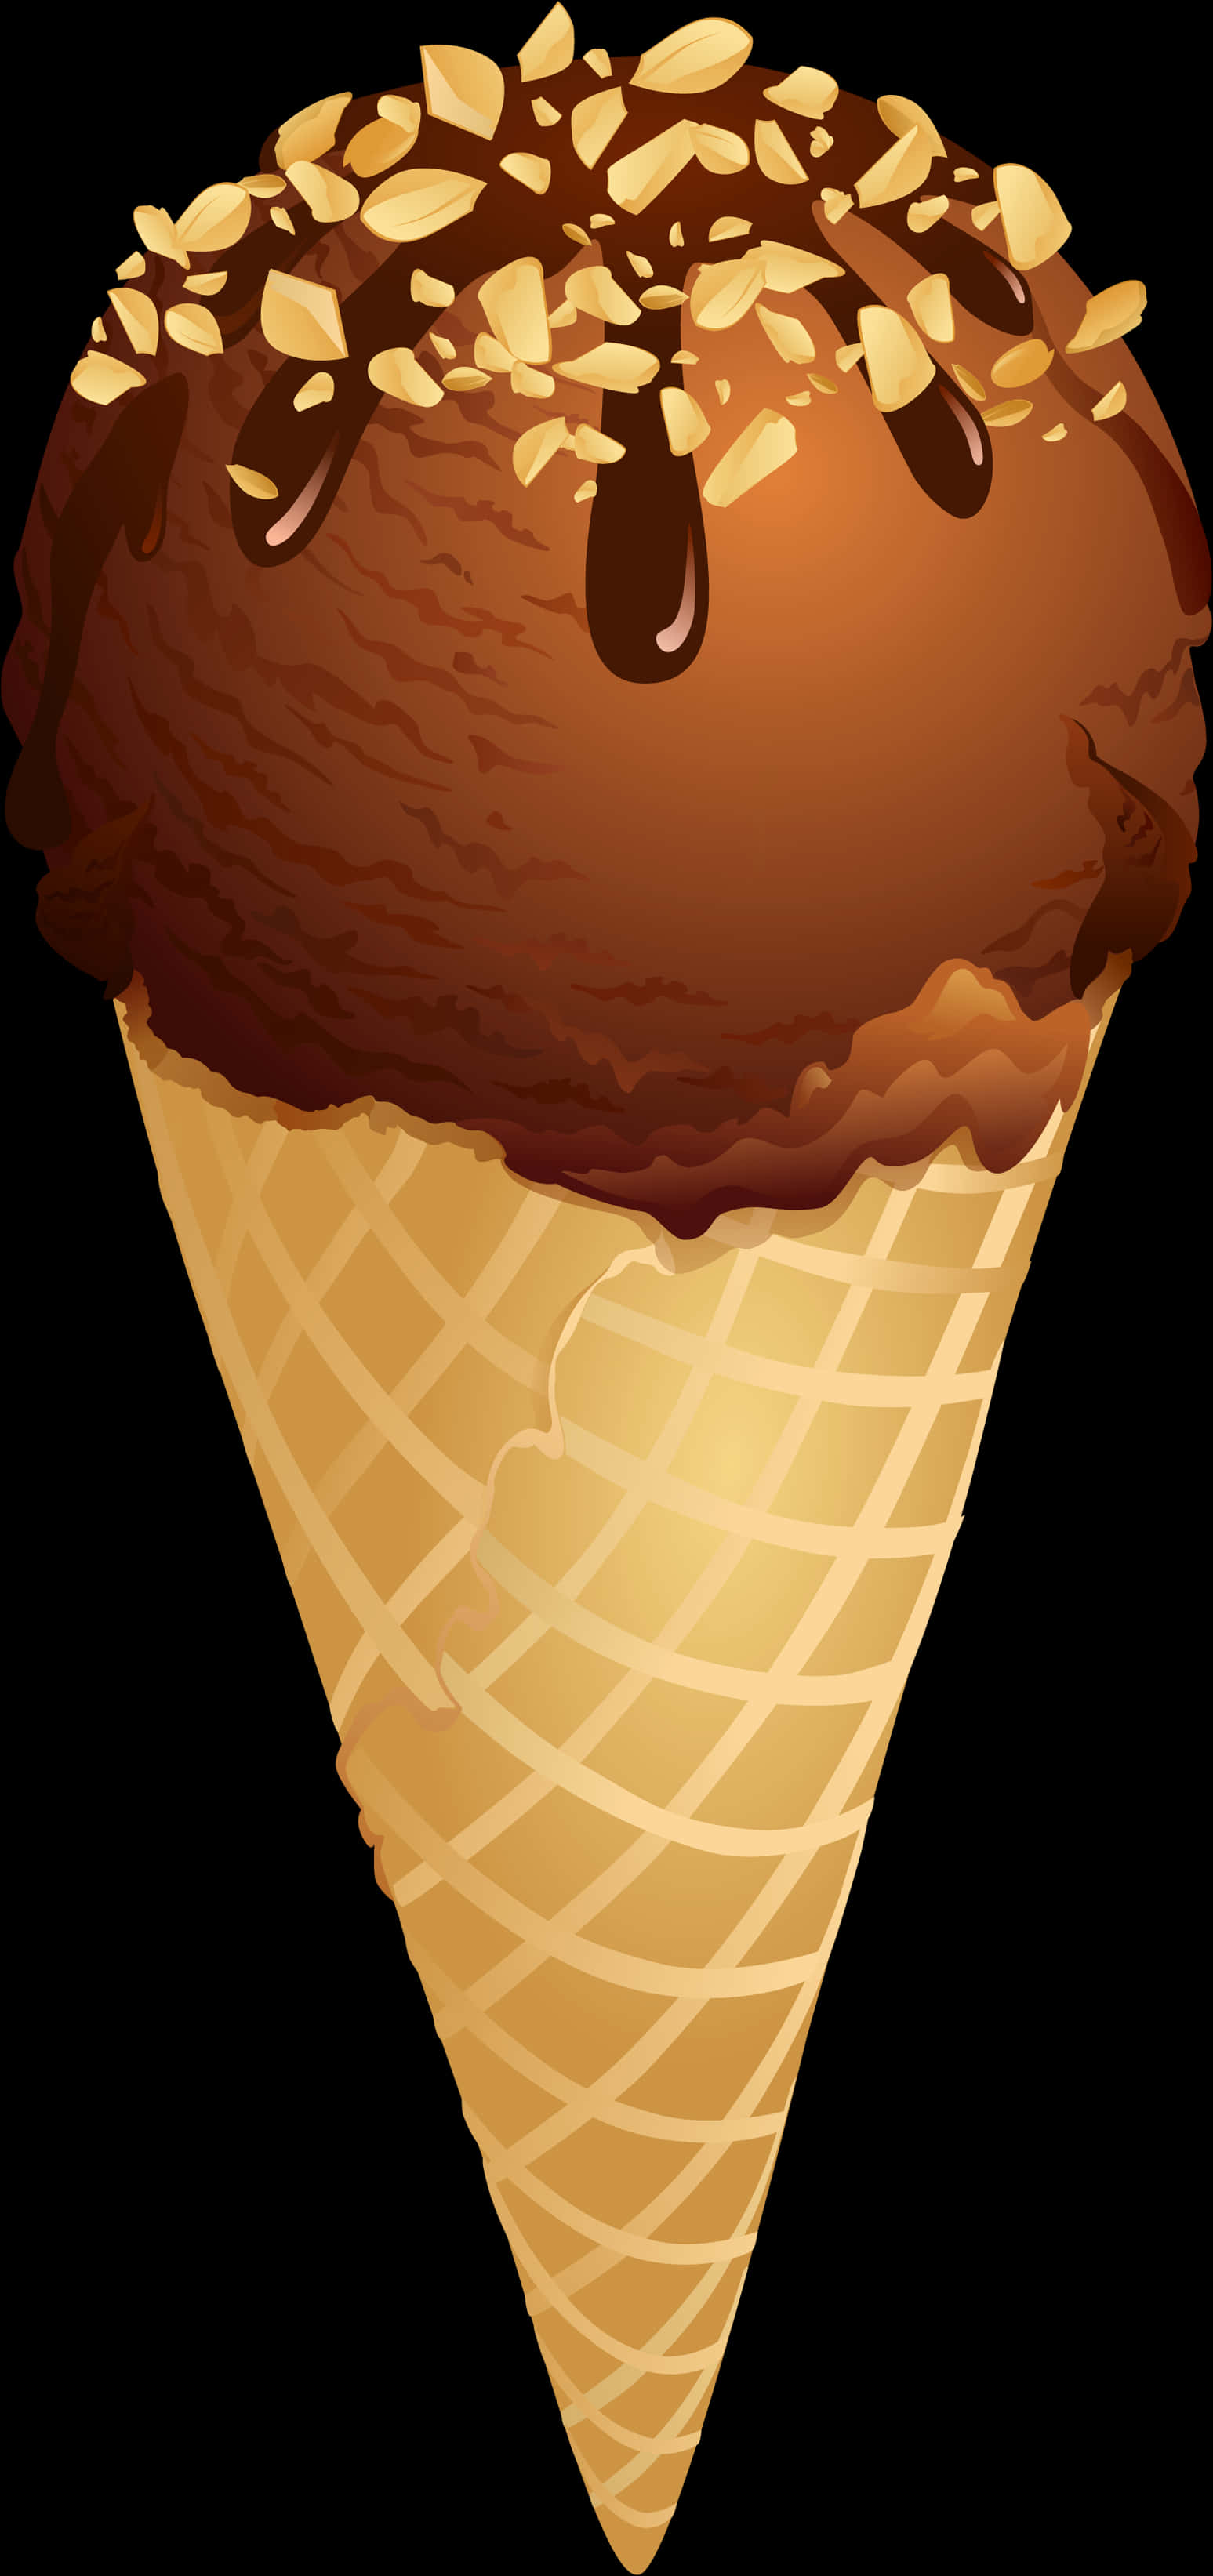 Chocolate Almond Ice Cream Cone Clipart PNG